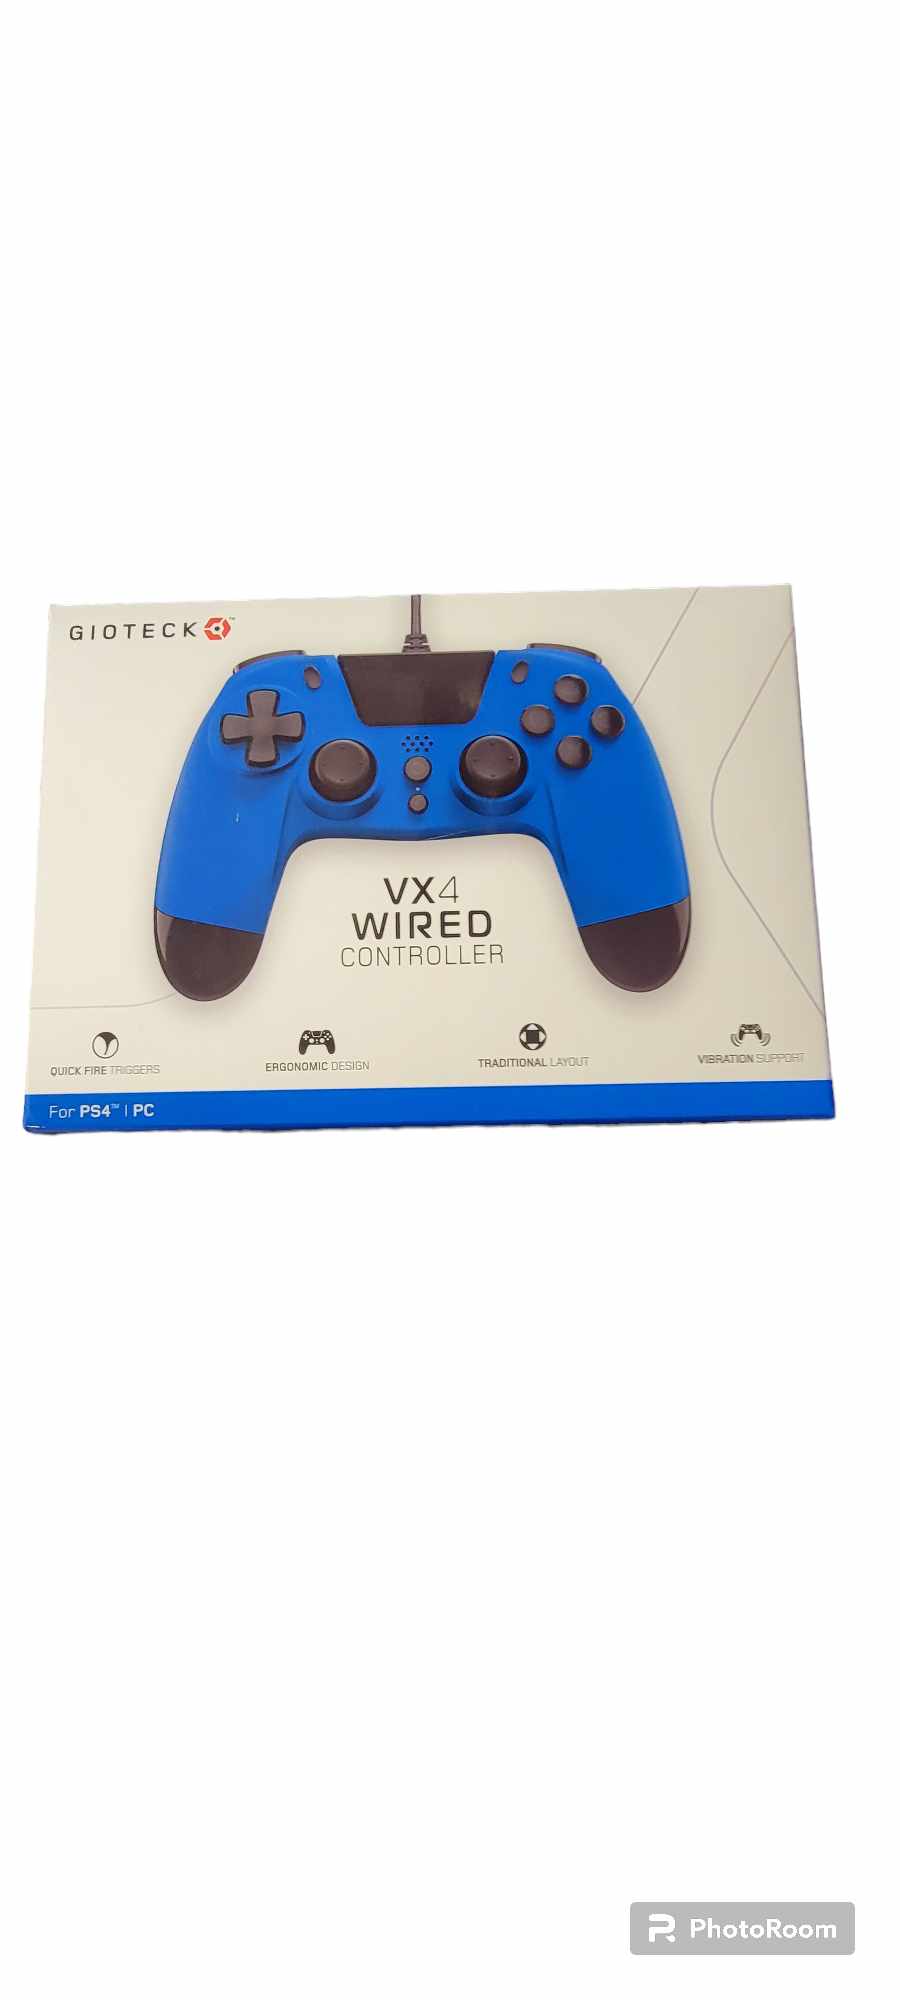 Gioteck VX4 Wired Controller Blue PS4